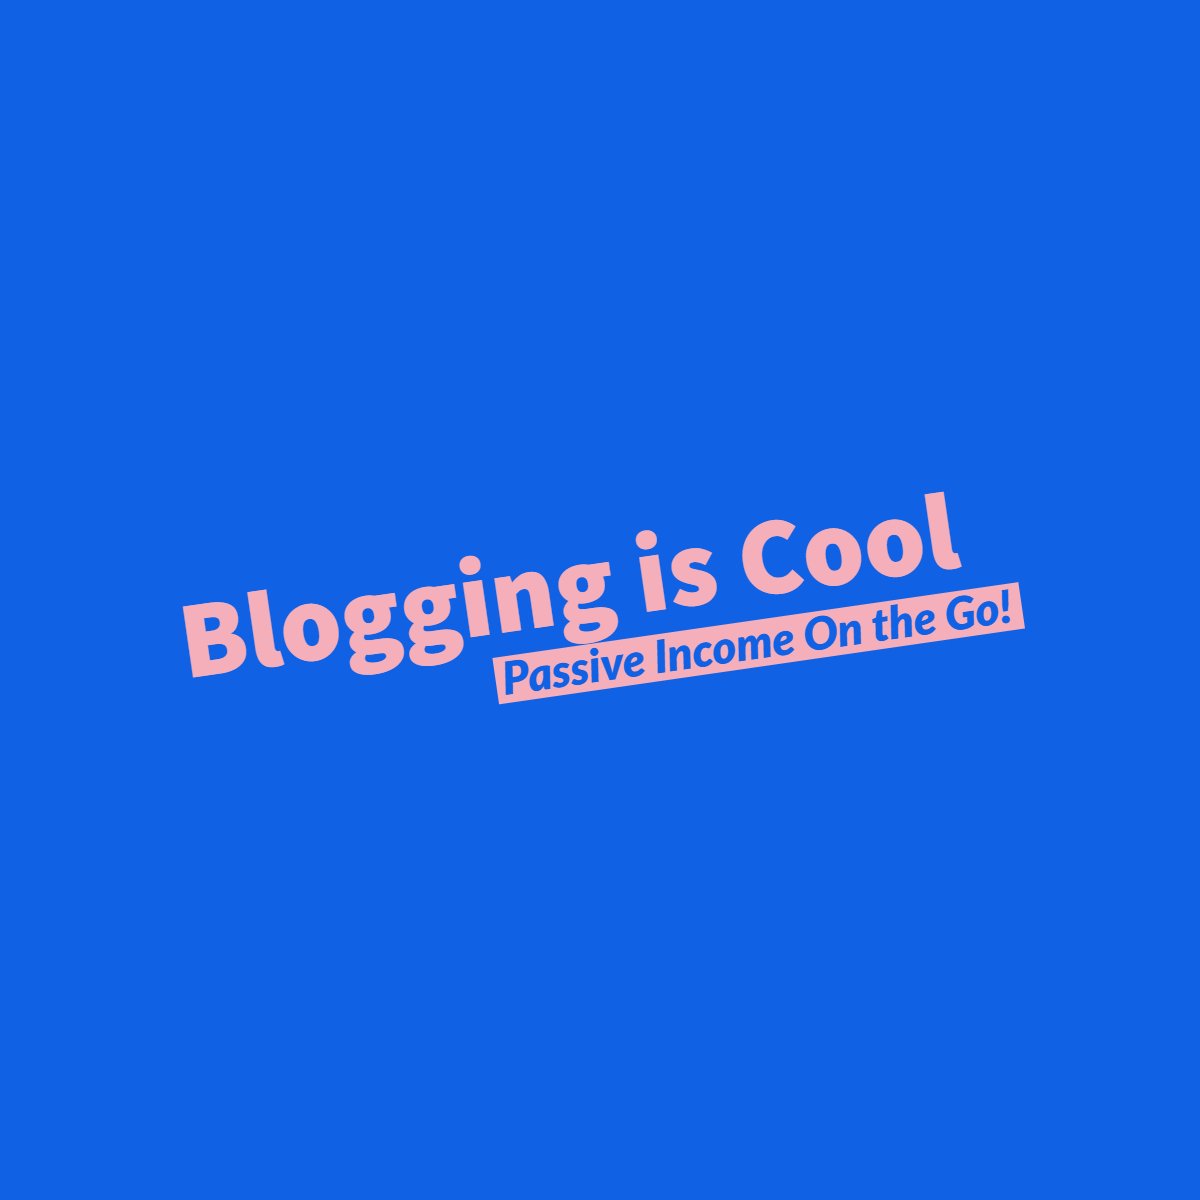 bloggingiscool.com the Eater as inspiration to bloggers